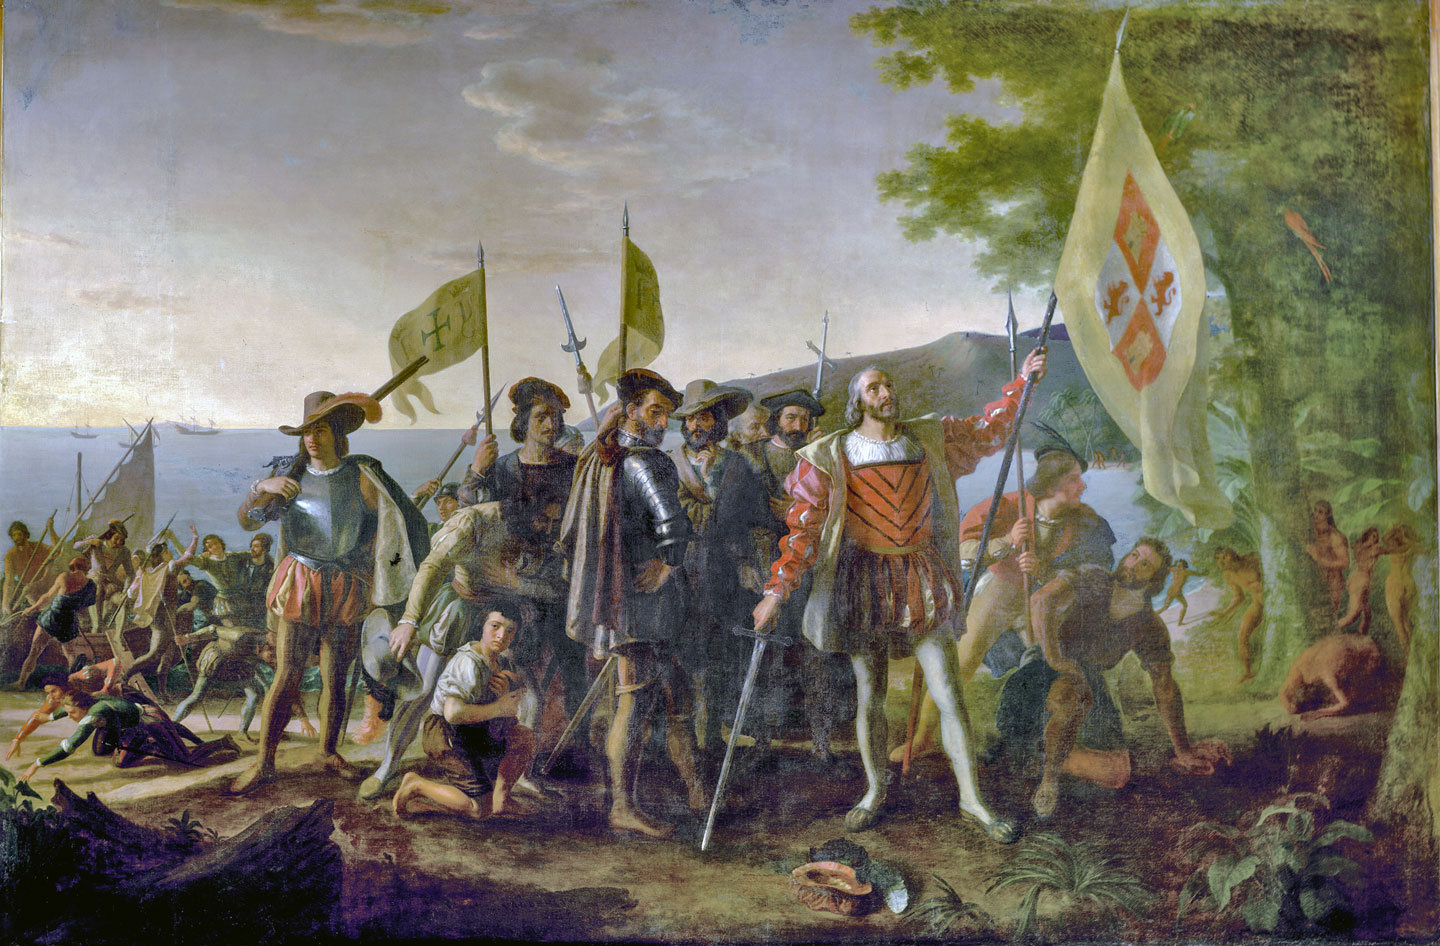 Painting of the landing of Columbus in the Caribbean in 1492